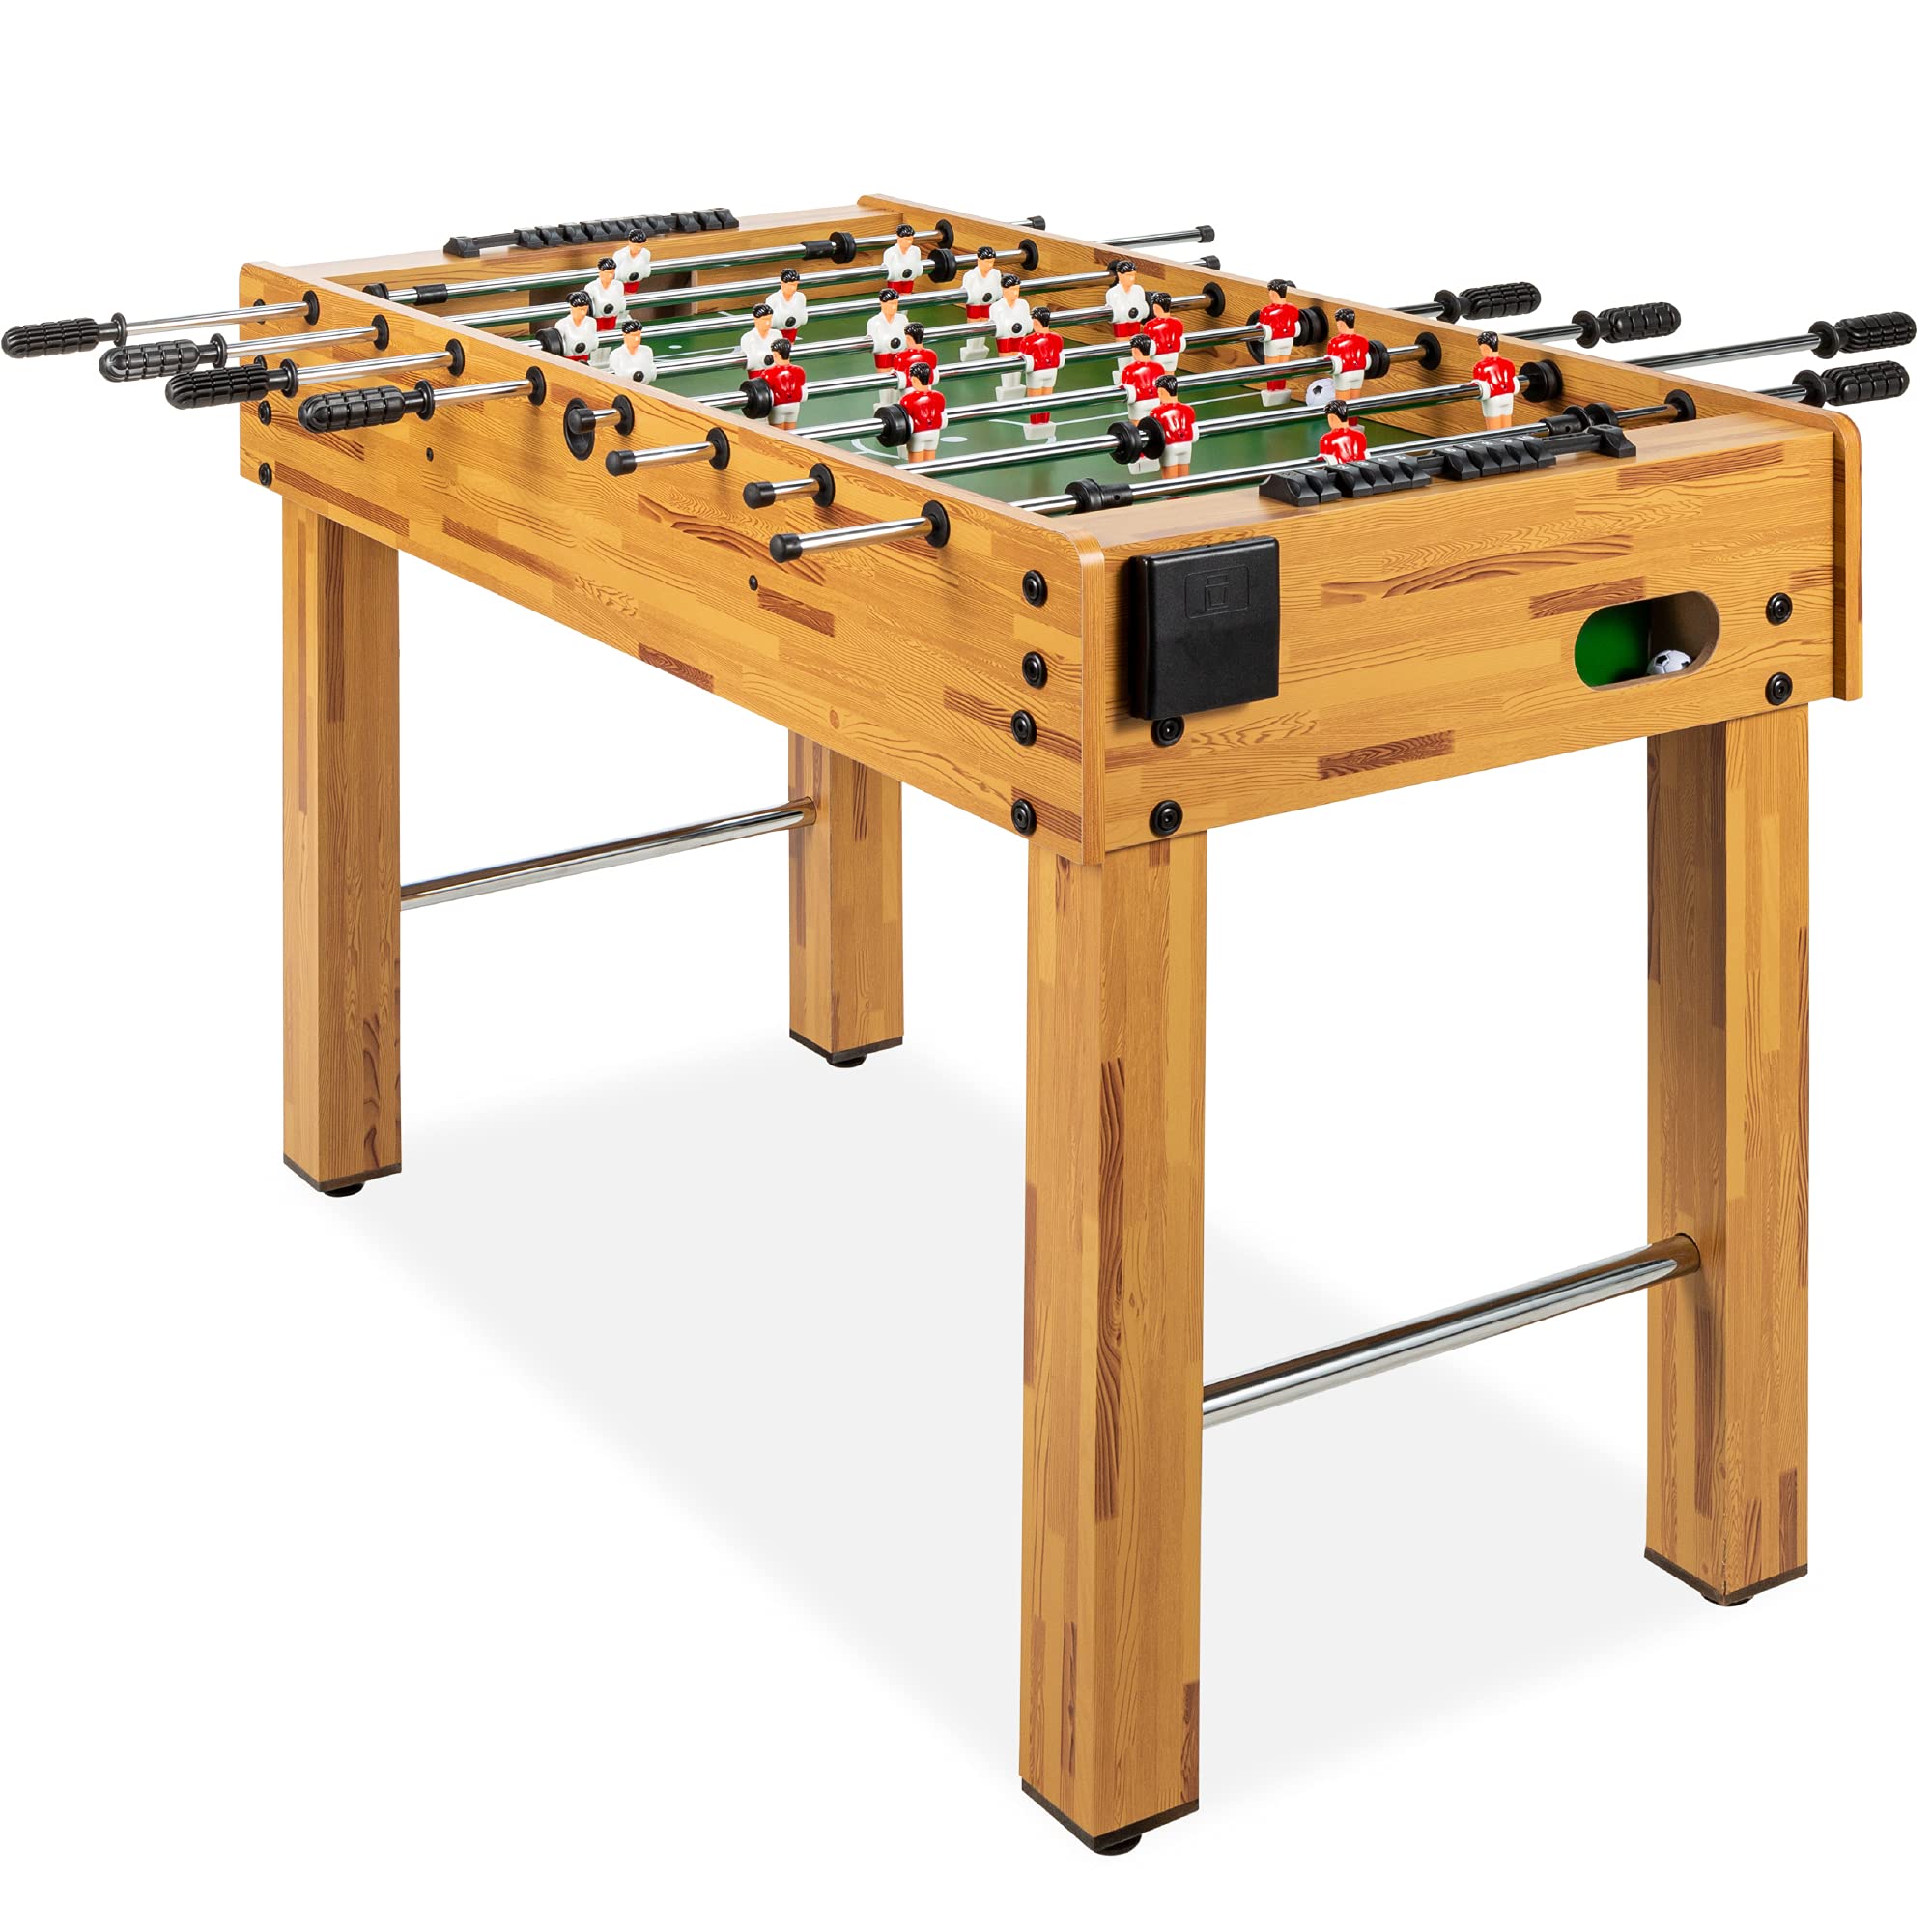 Best Choice Products 48in Game Room Size Foosball Table, Arcade Table Soccer for Home, Arcade w/ 2 Balls, 2 Cup Holders - Light Brown